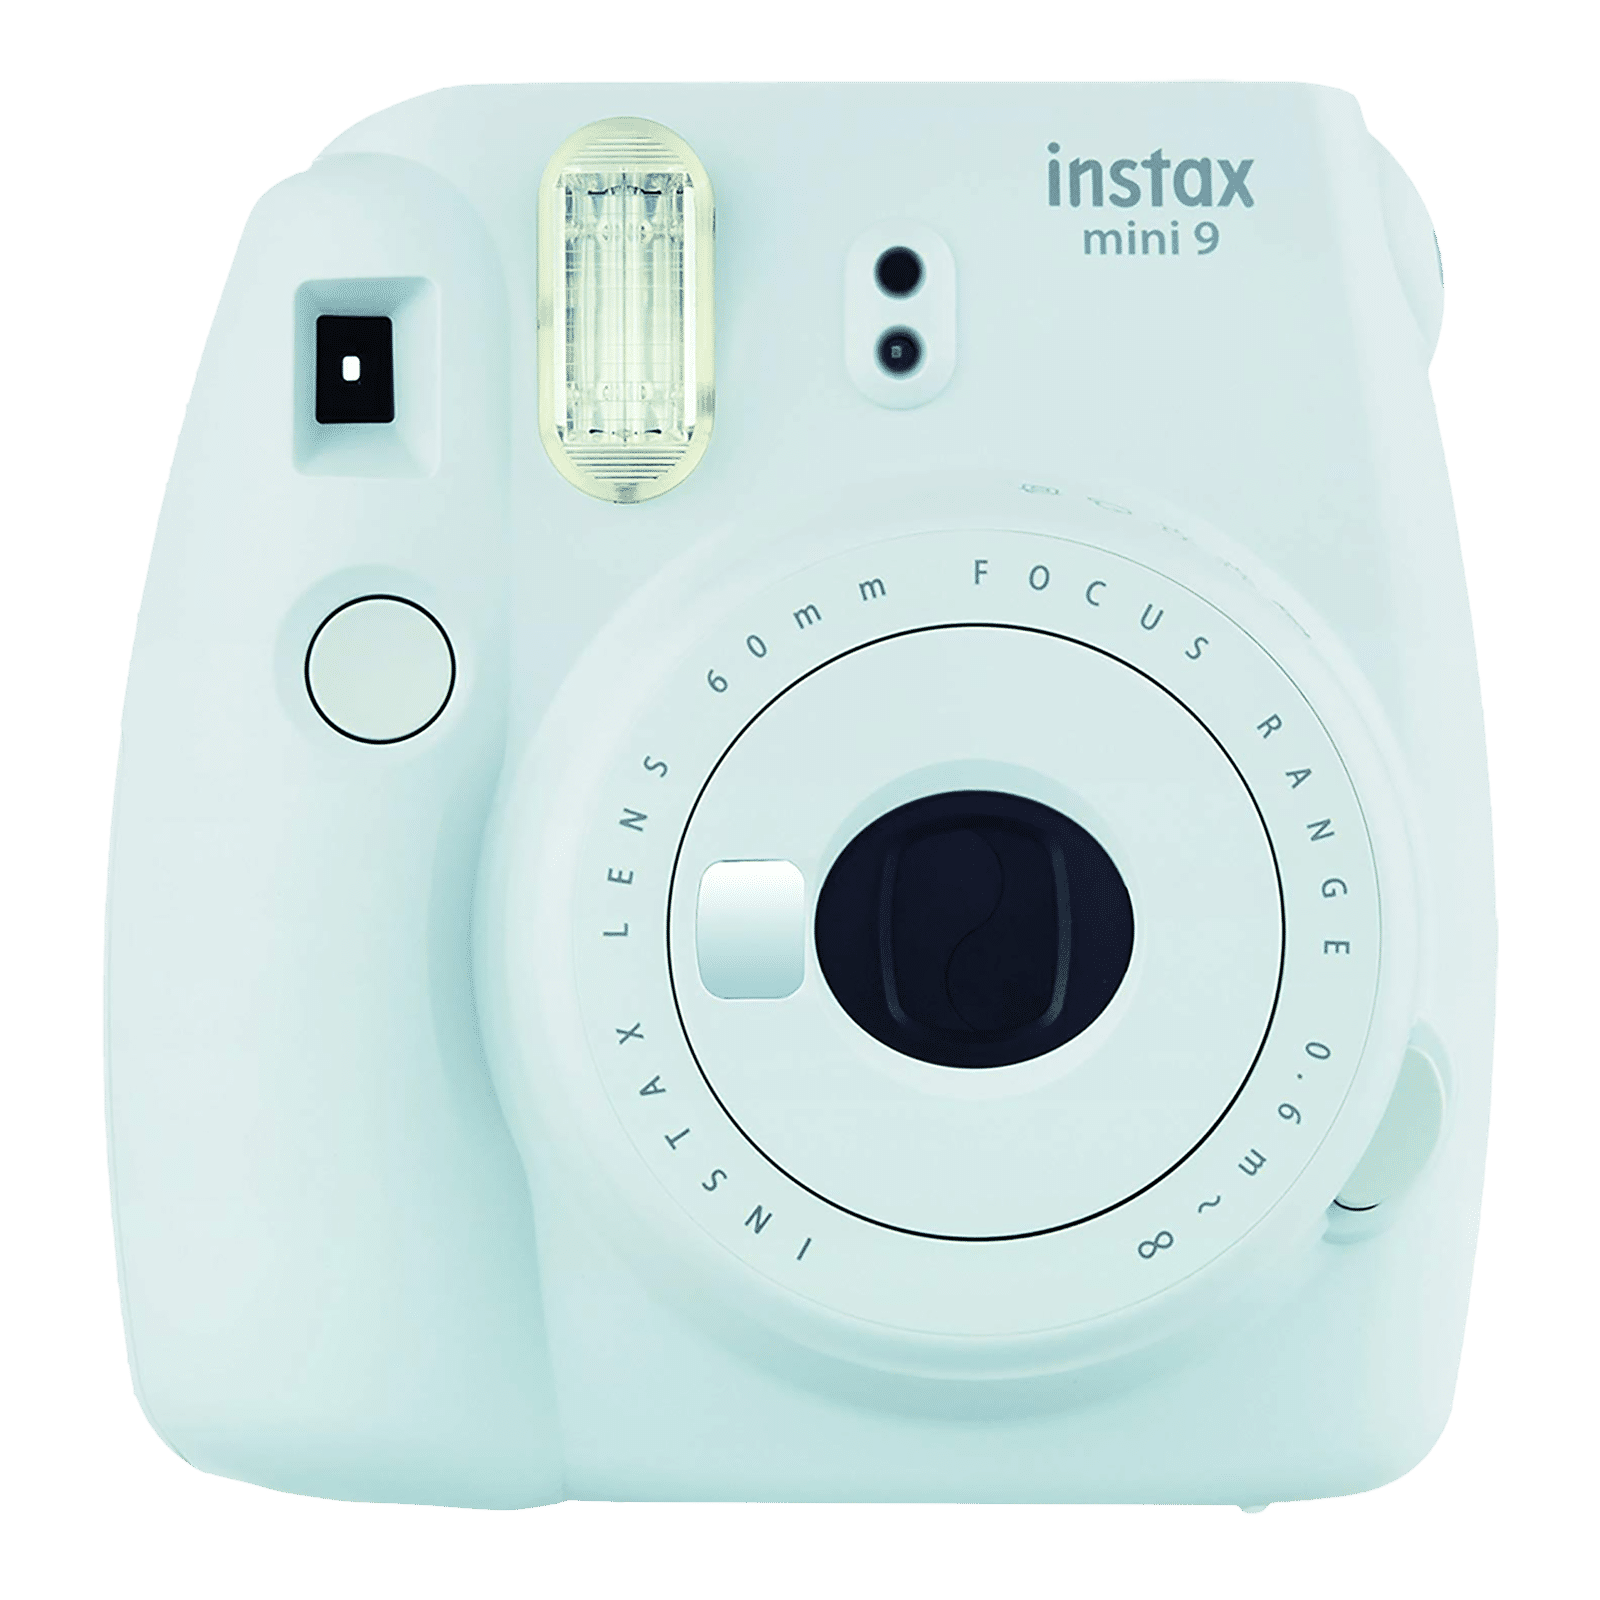 Polaroid Now I-Type Instant Camera Review: A Reborn Classic